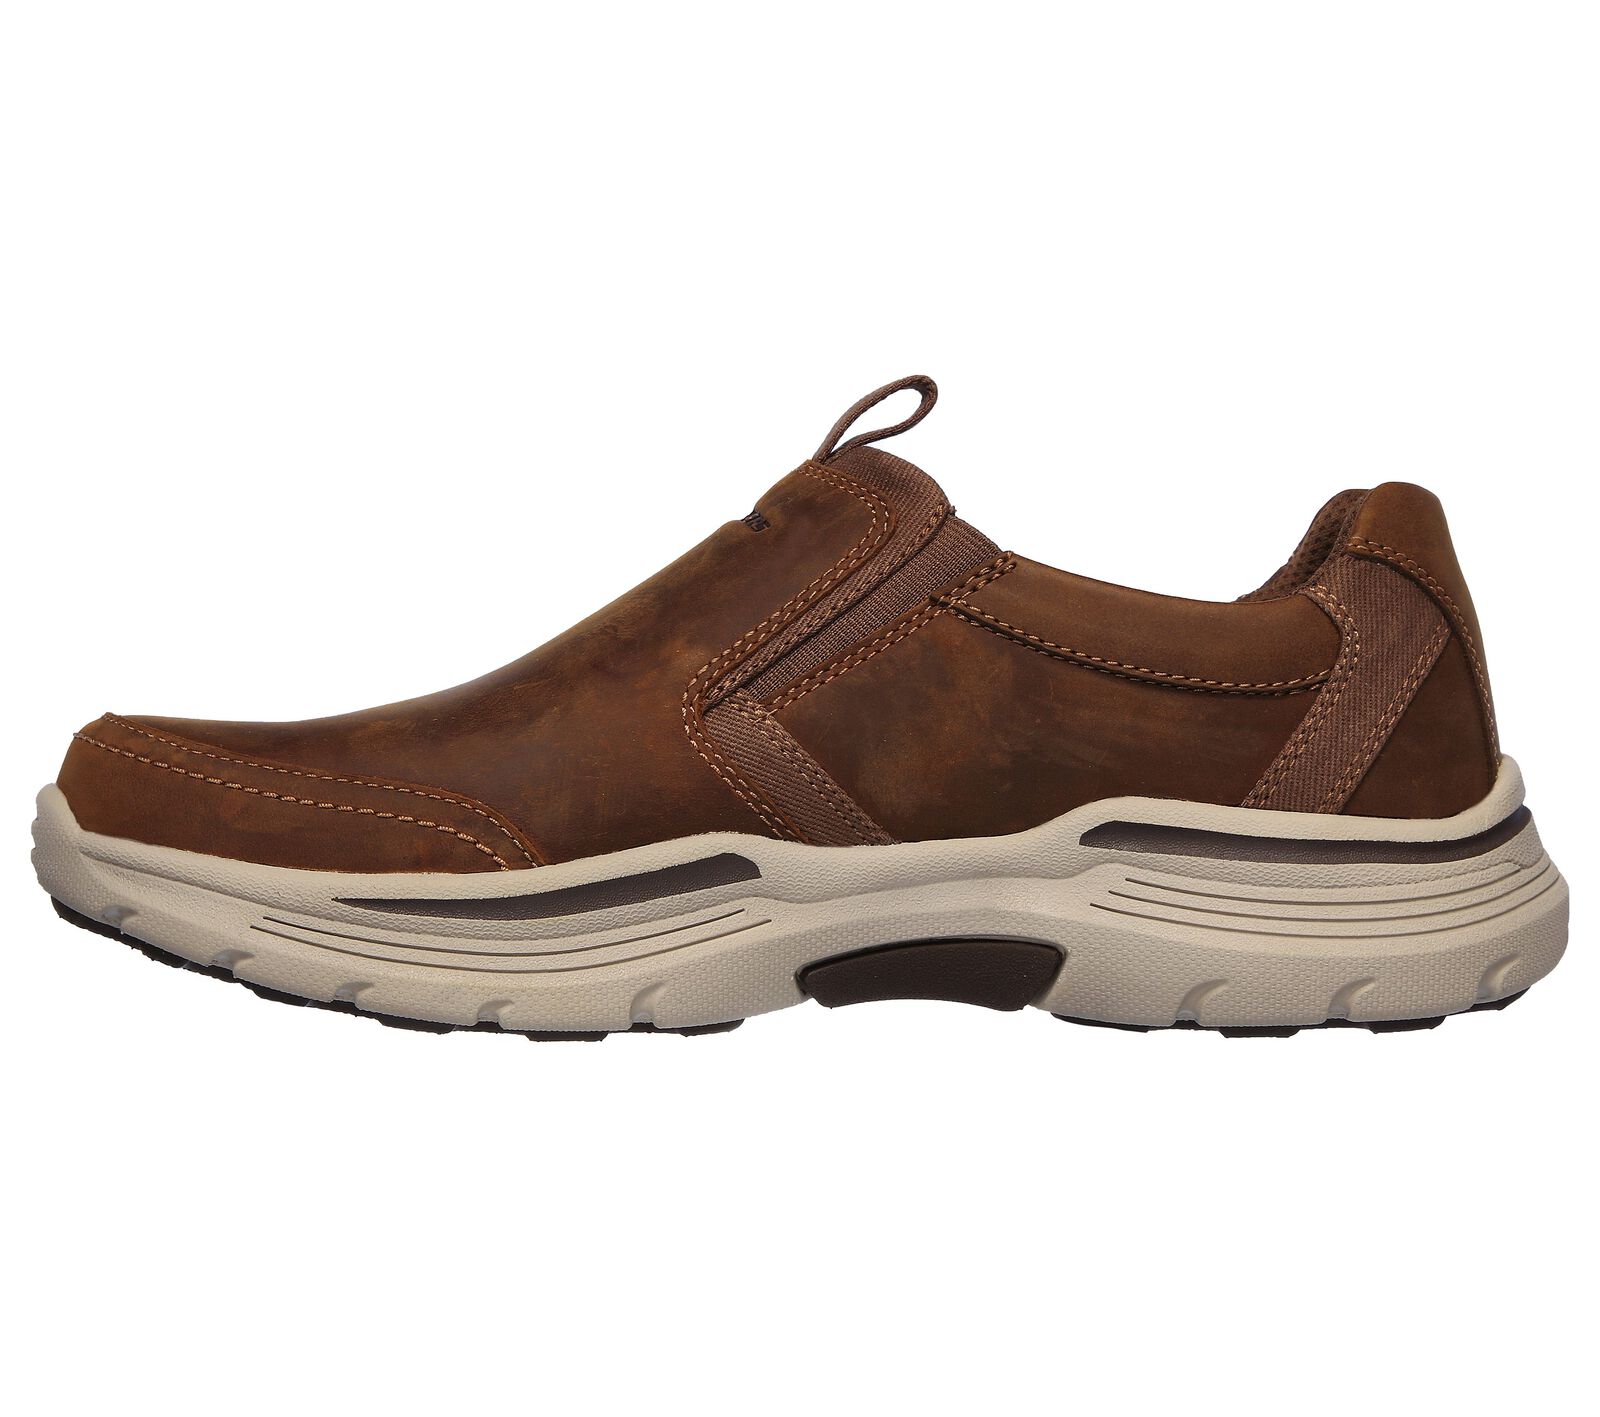 Shop the Relaxed Fit: Expended - Morgo | SKECHERS